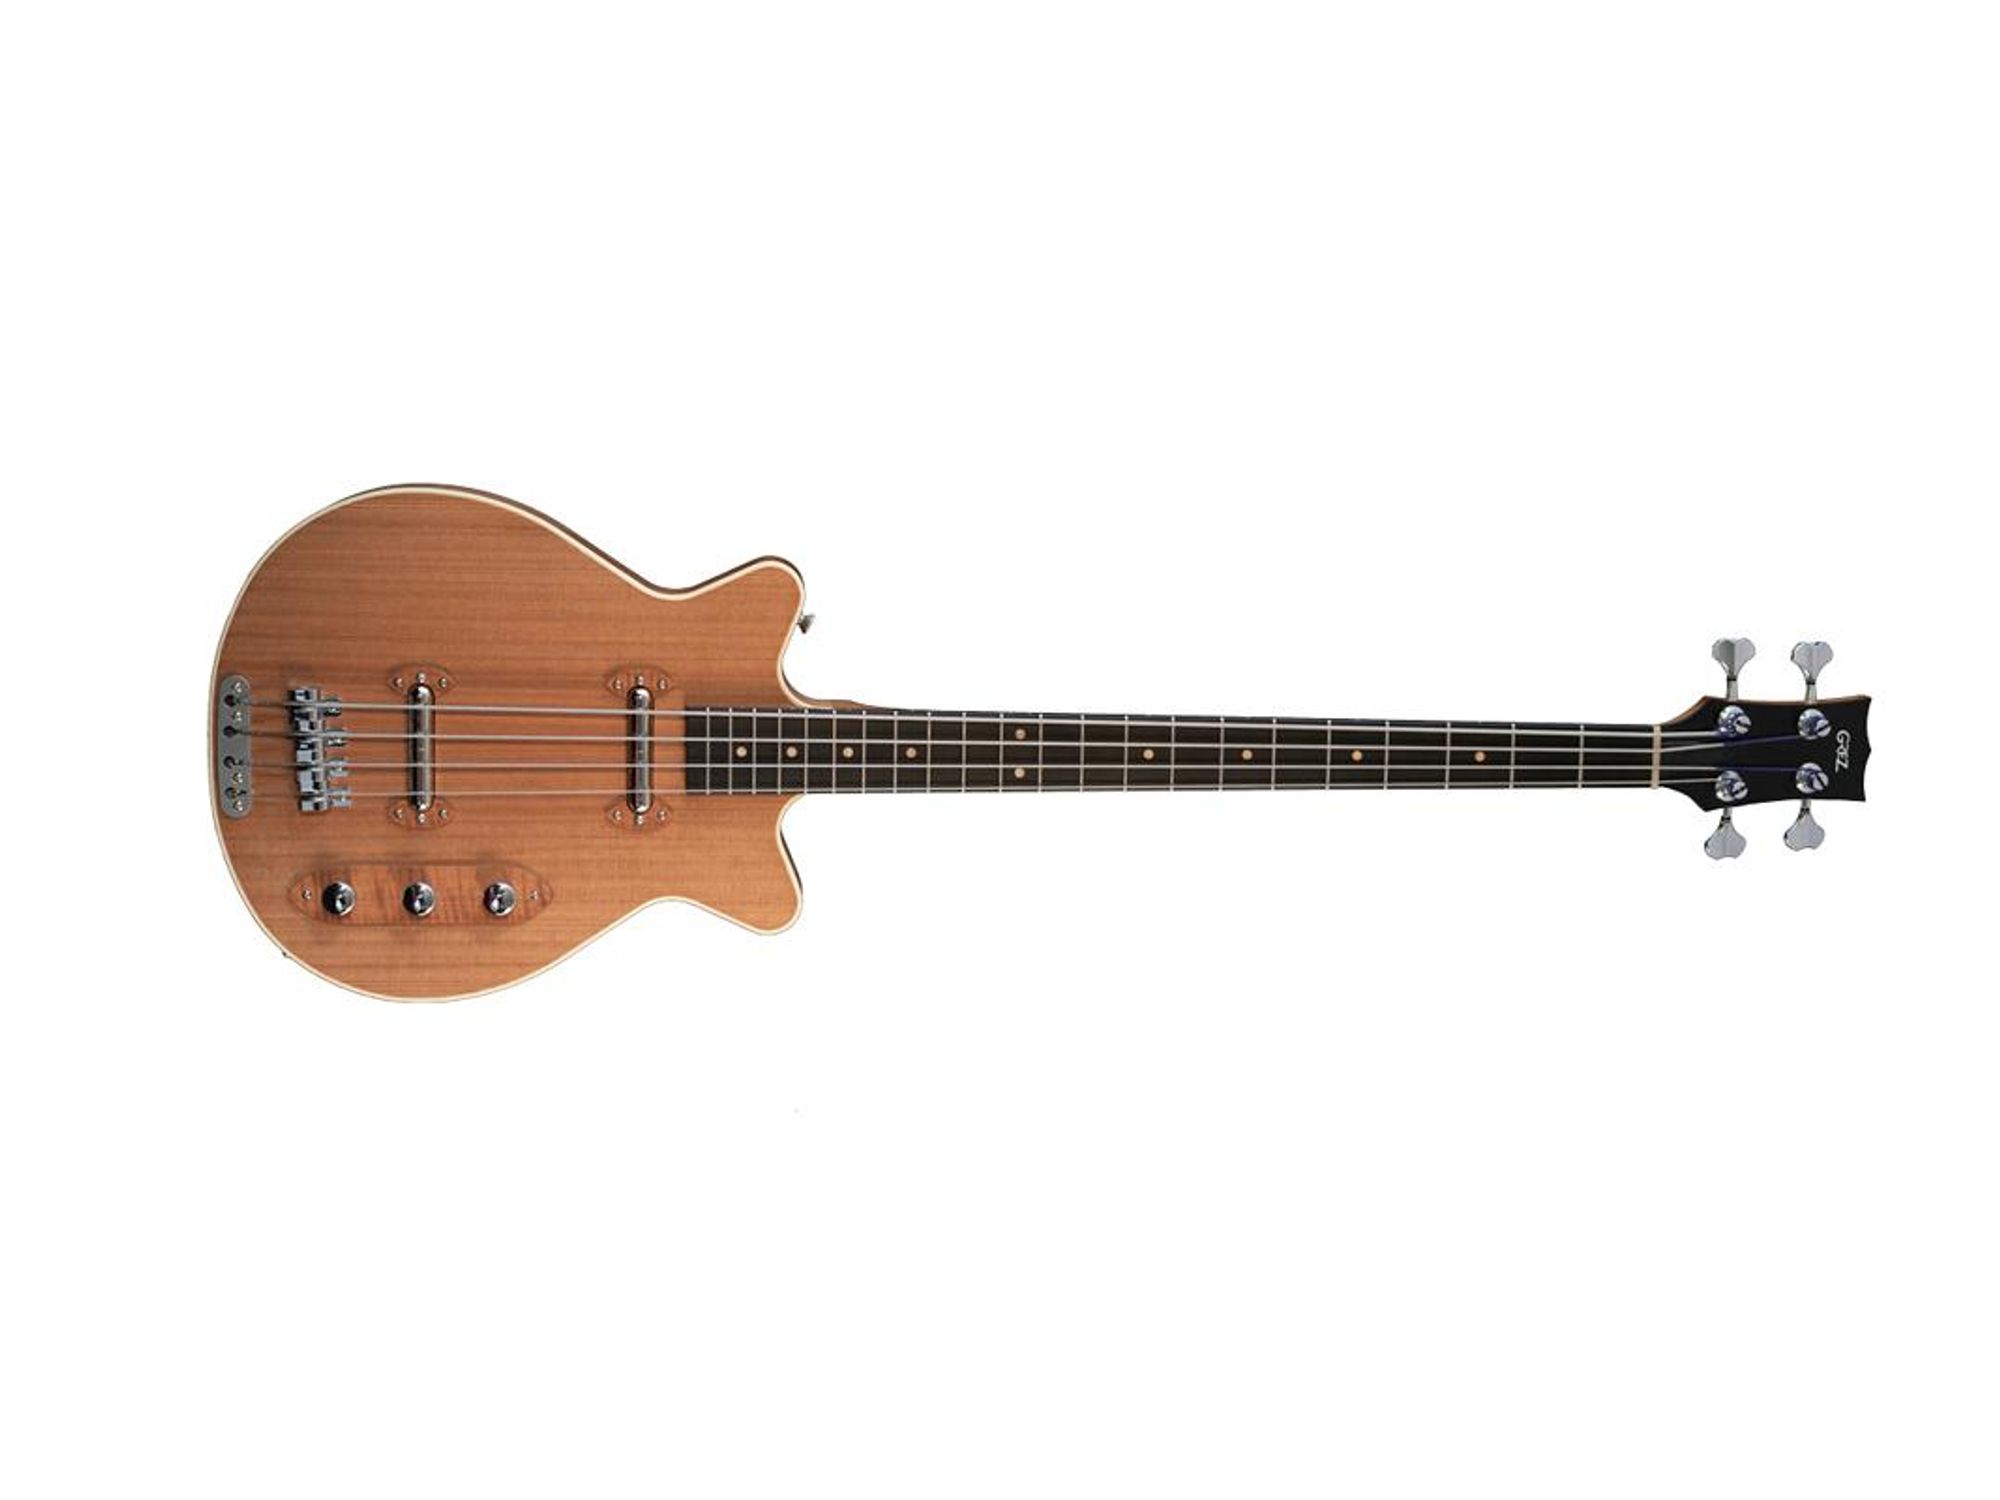 Grez Guitars Releases the Mendocino Long Scale Bass